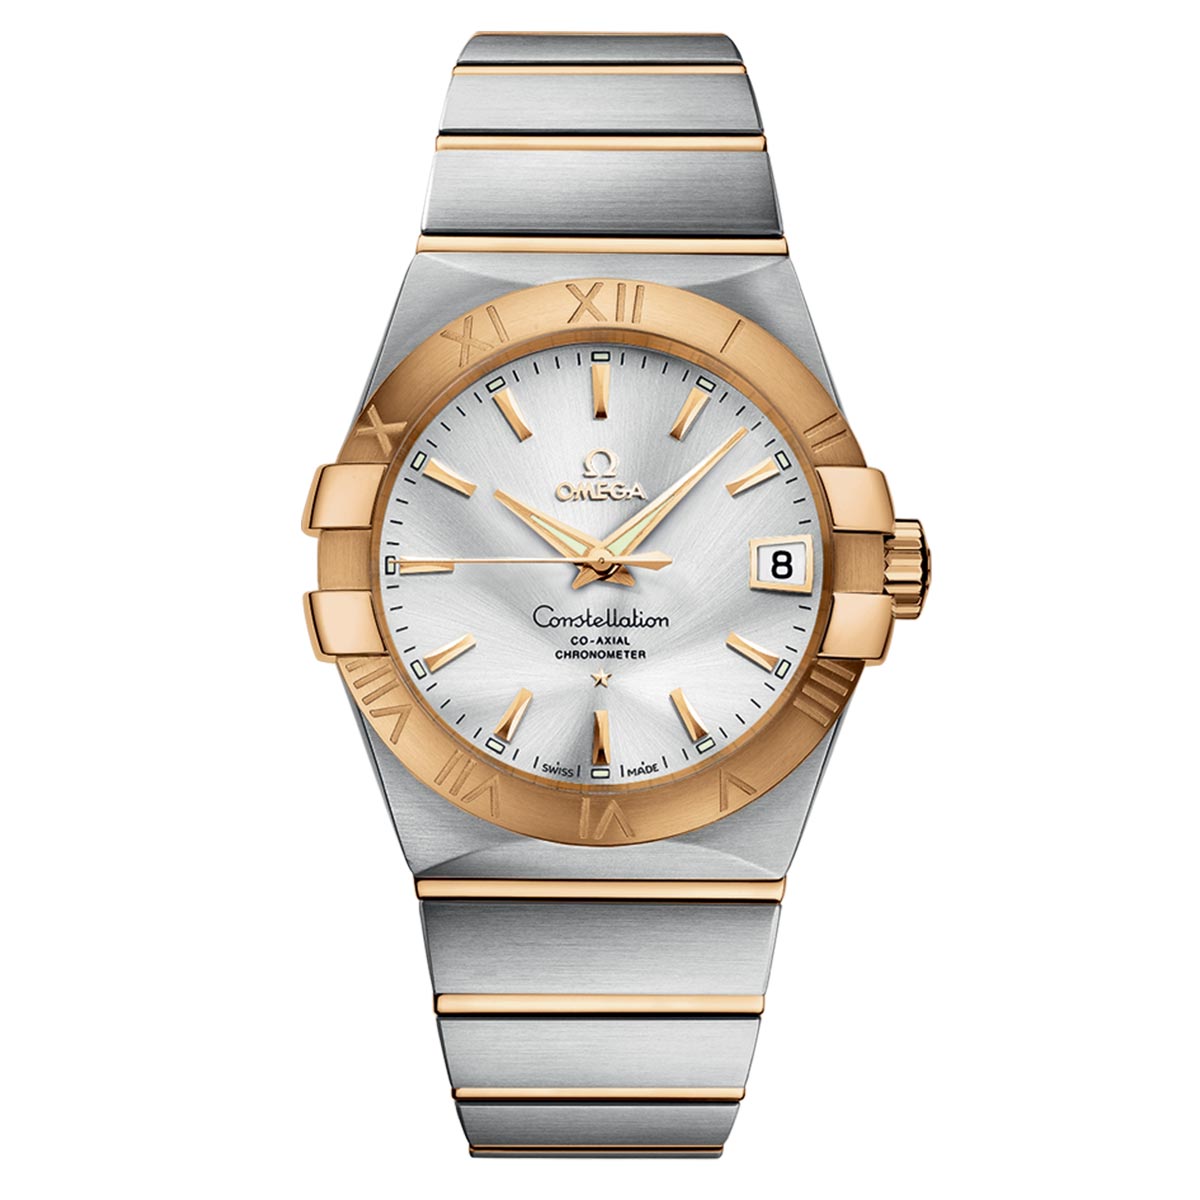 OMEGA Constellation Co-Axial Chronometer 38mm Watch